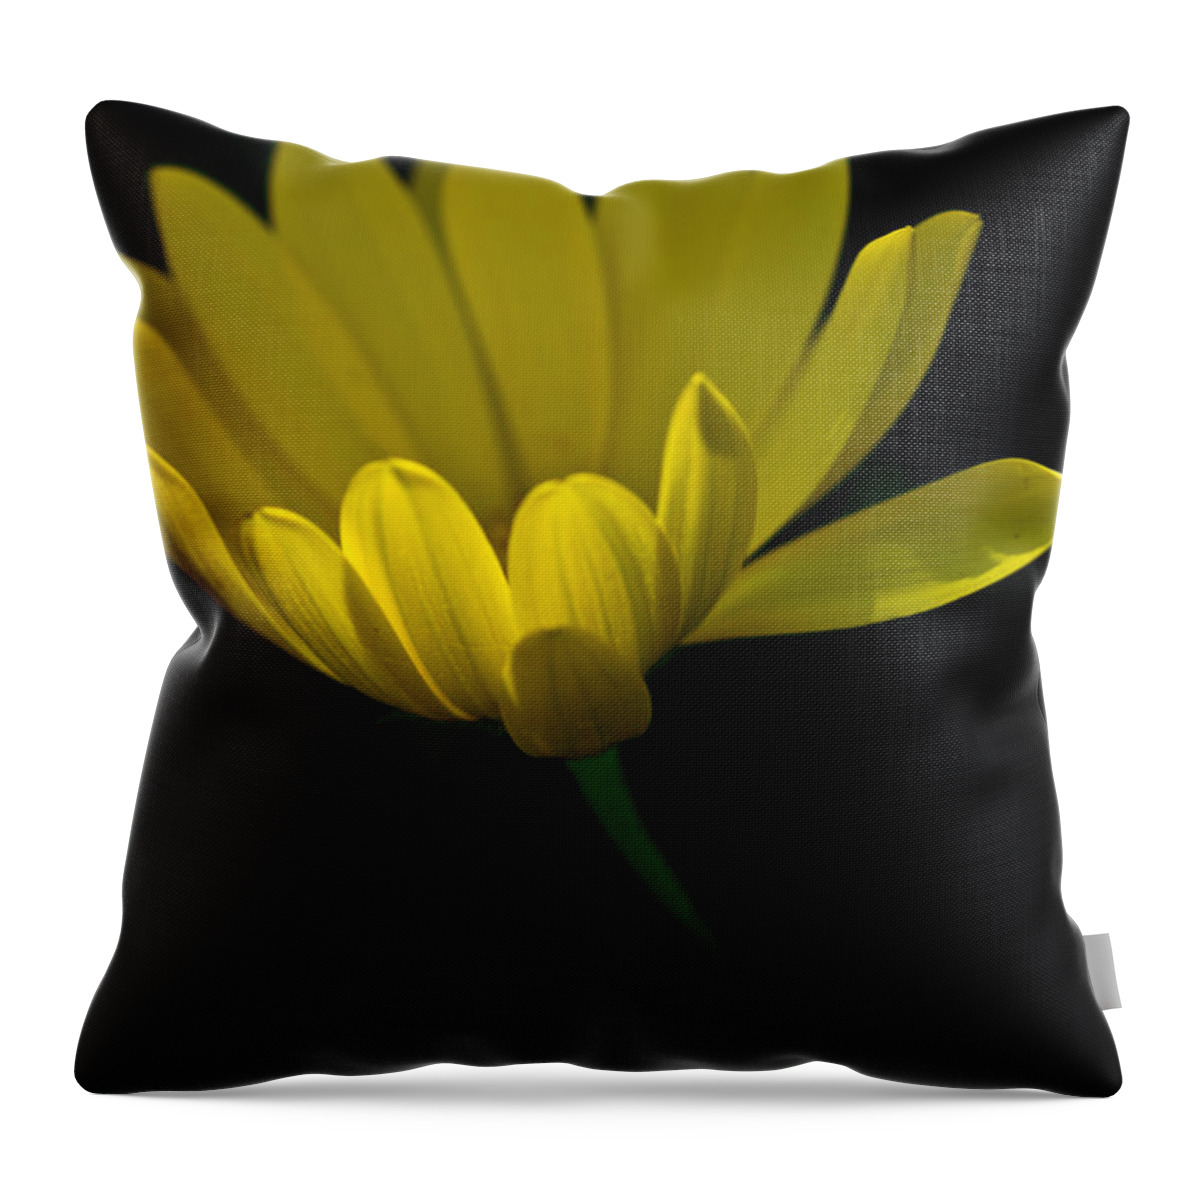 Flower Throw Pillow featuring the photograph Yellow Flower by Tom Gari Gallery-Three-Photography